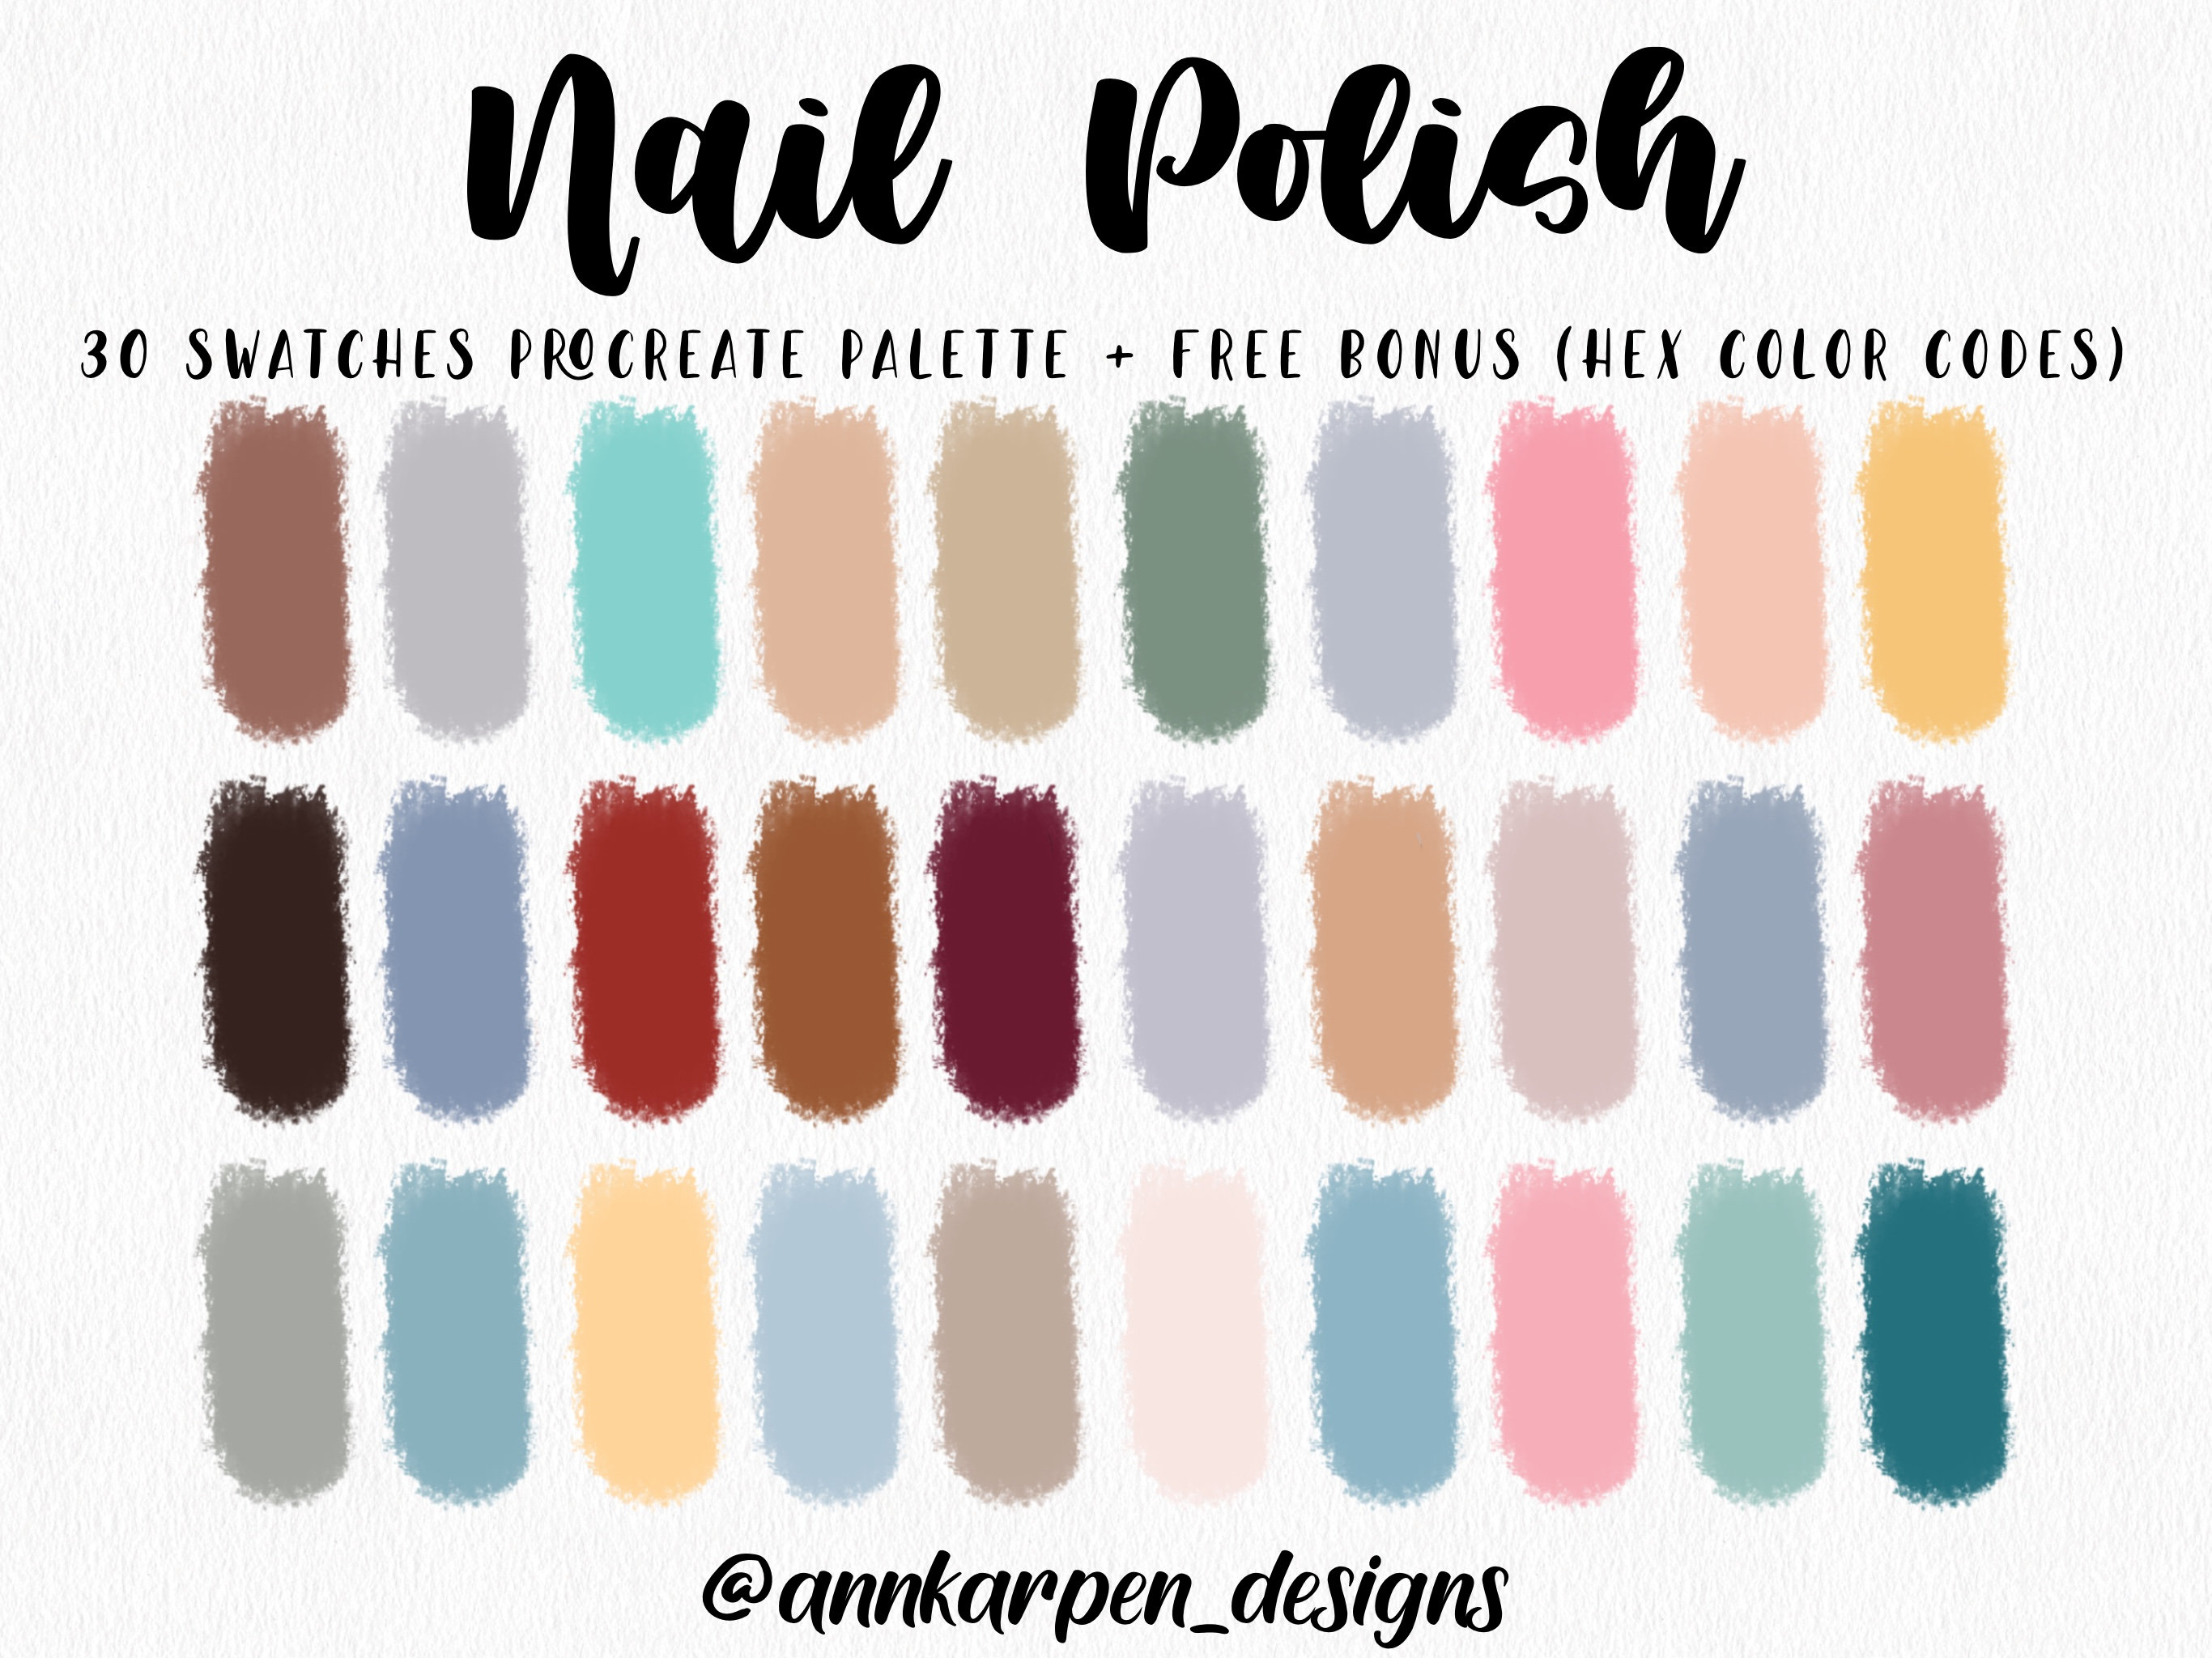 3. "Cozy and Chic" Winter Nail Color Palette - wide 4